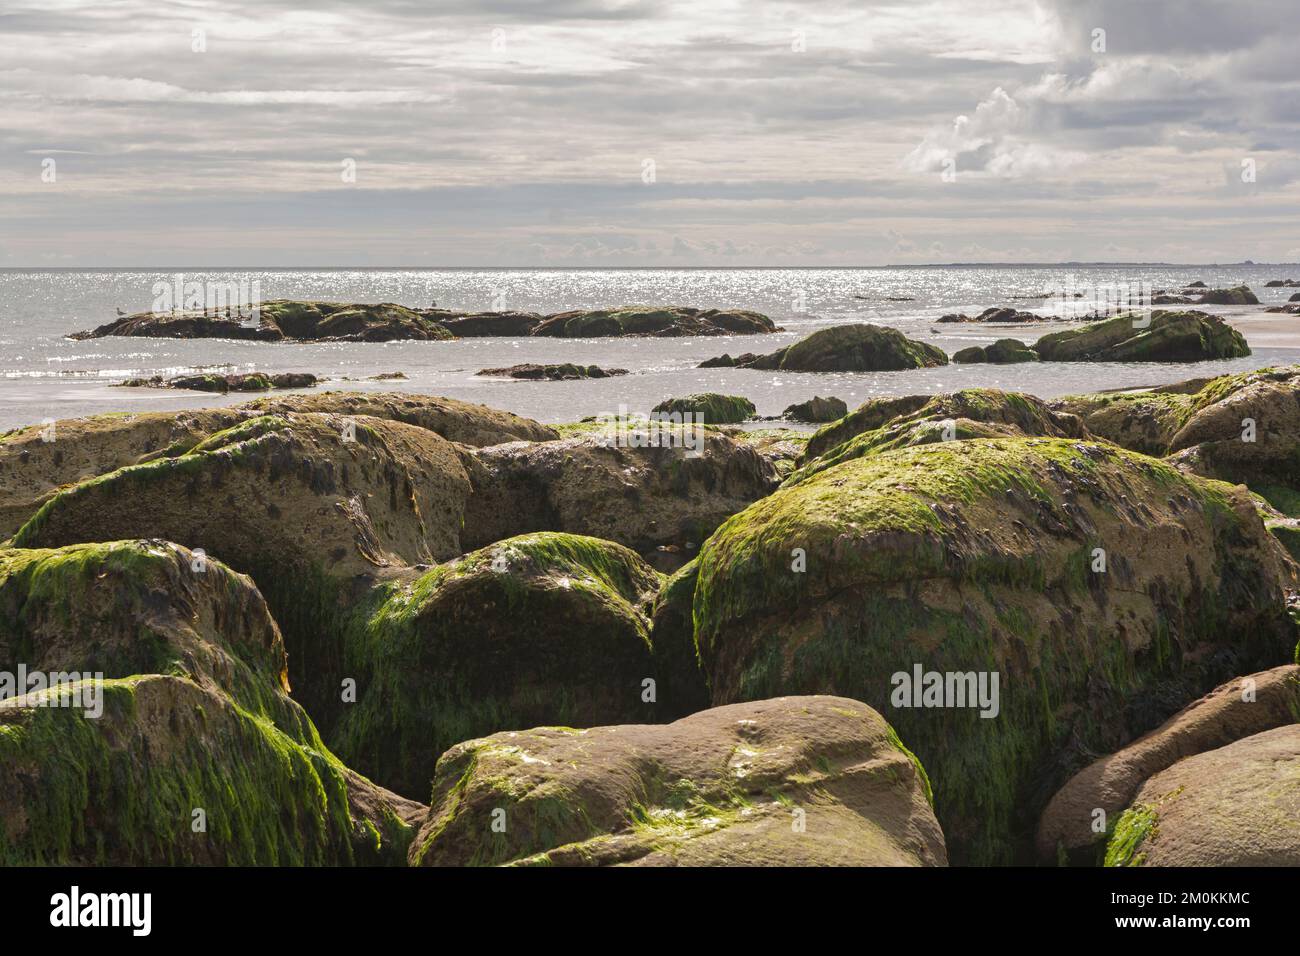 Large rocks on the sea shore, covered with seaweed Stock Photo